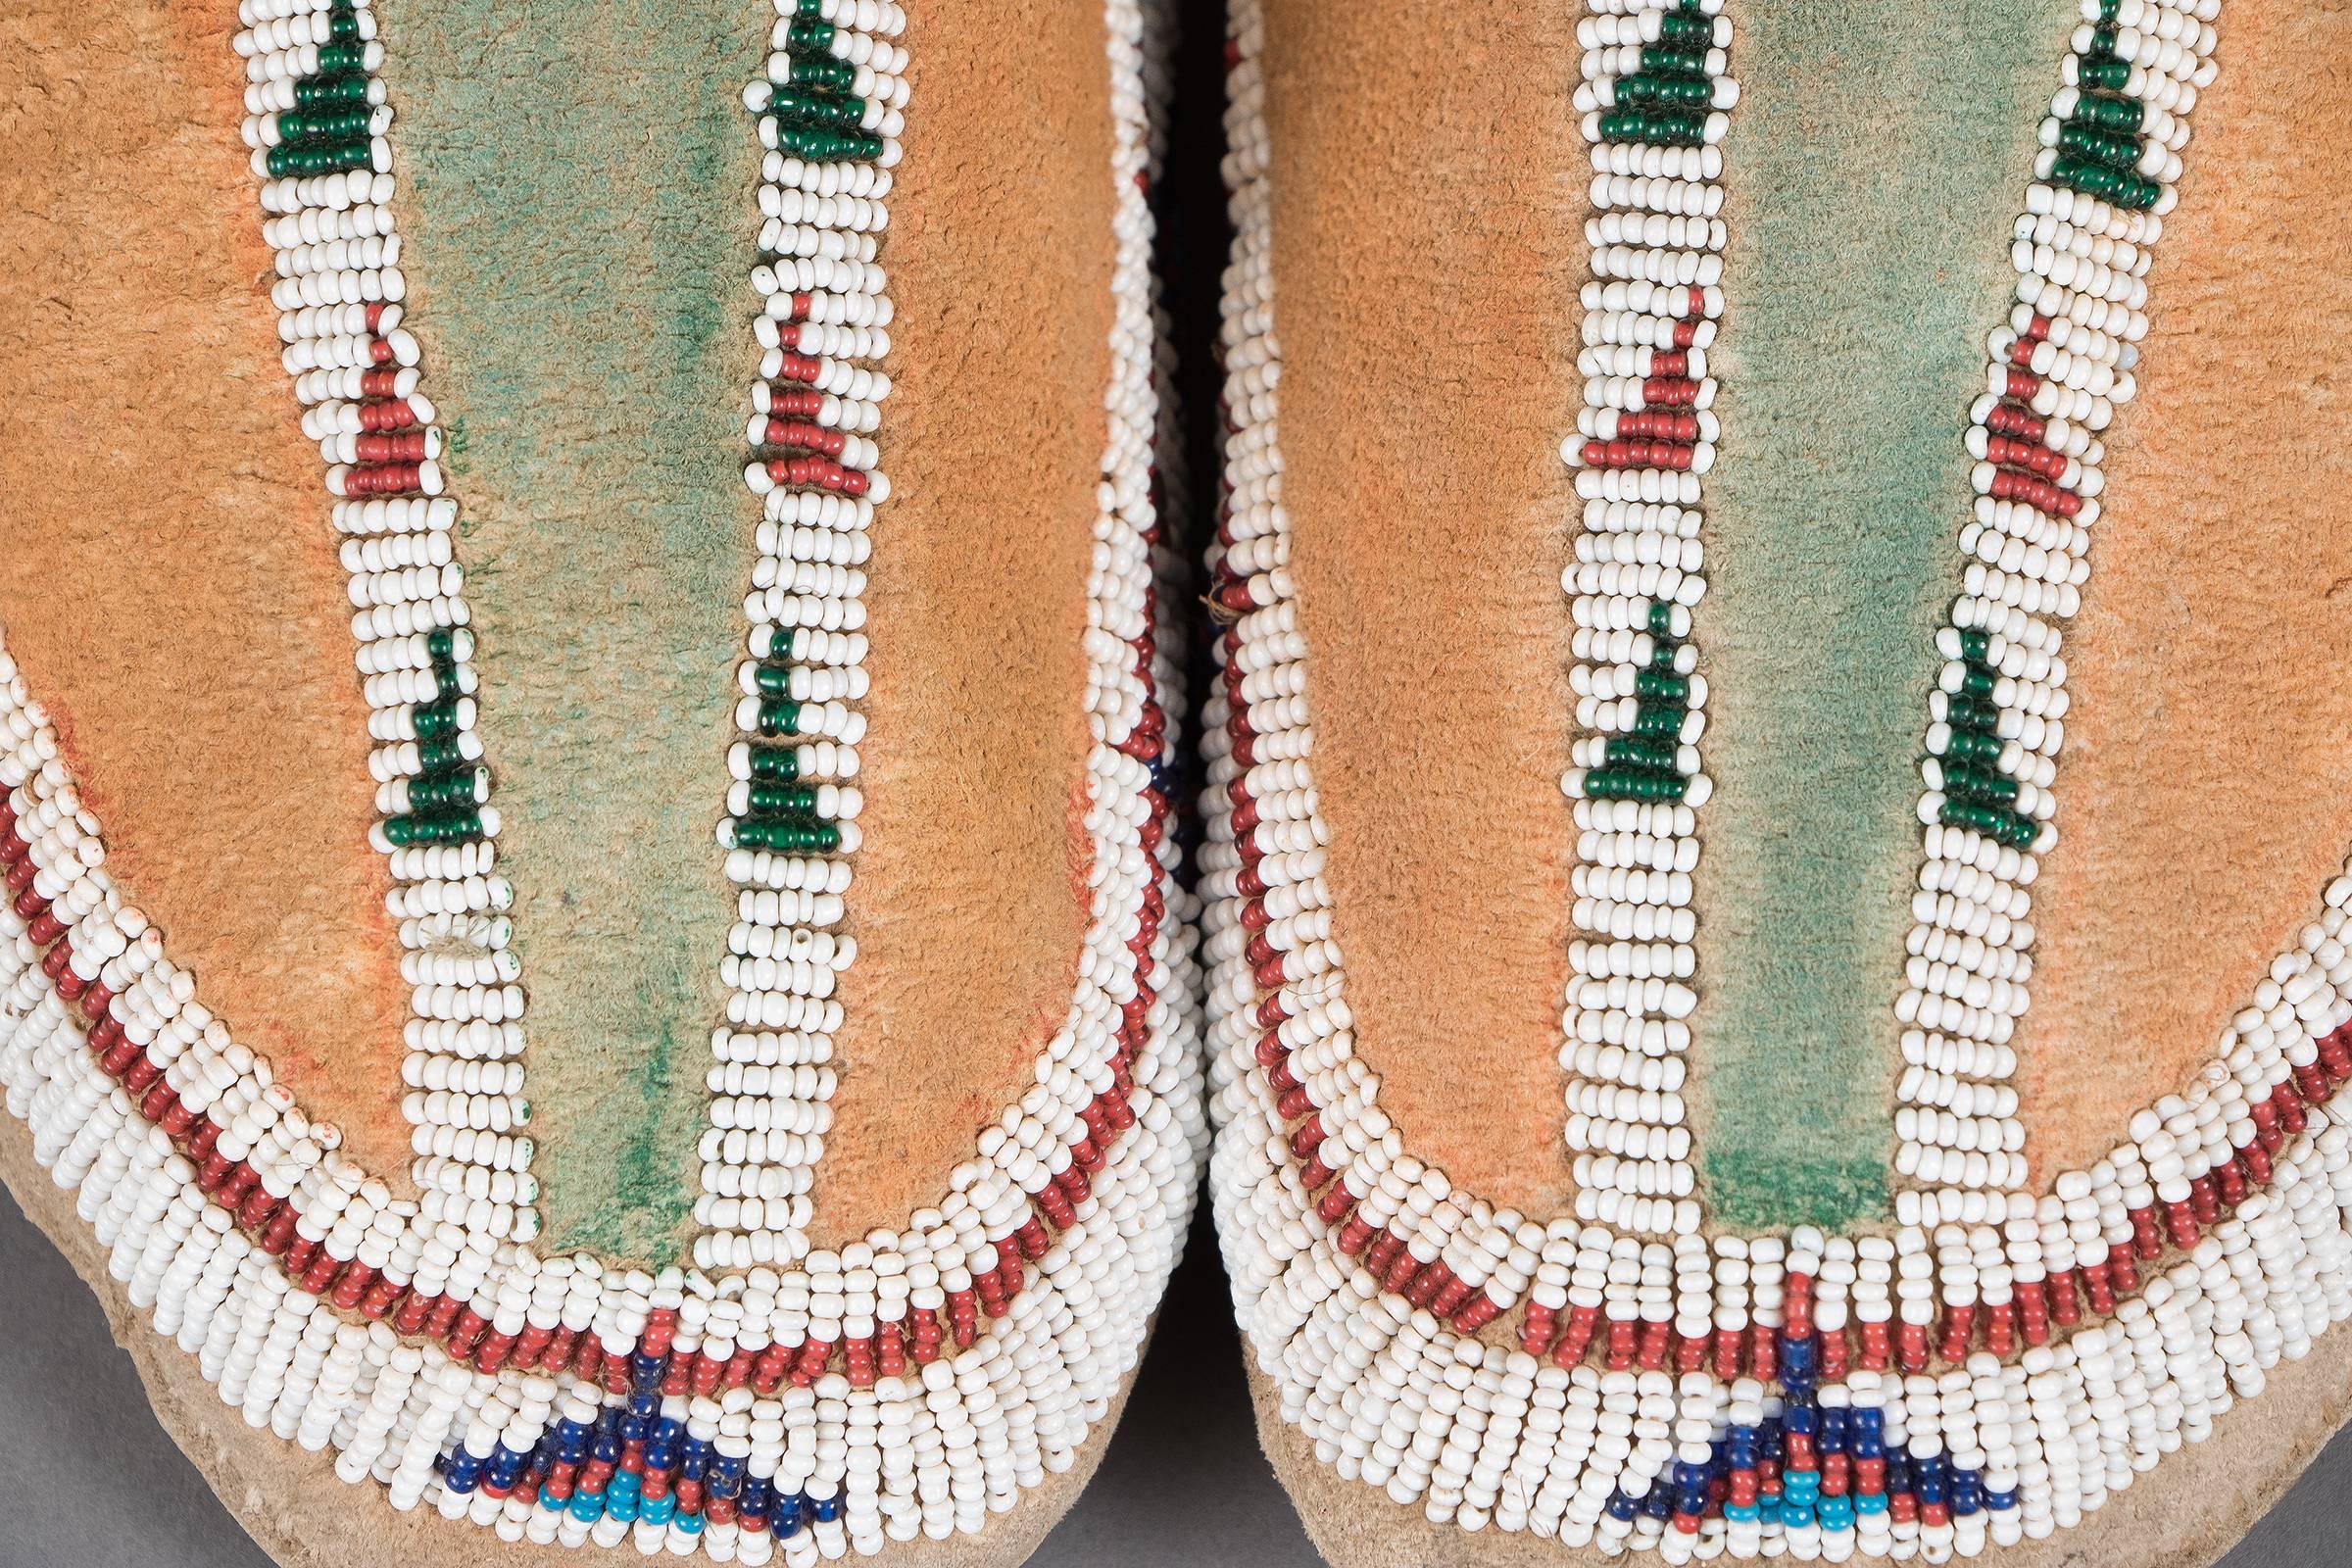 Hide Antique Native American Beaded Moccasins, Cheyenne (Plains Indian), circa 1890